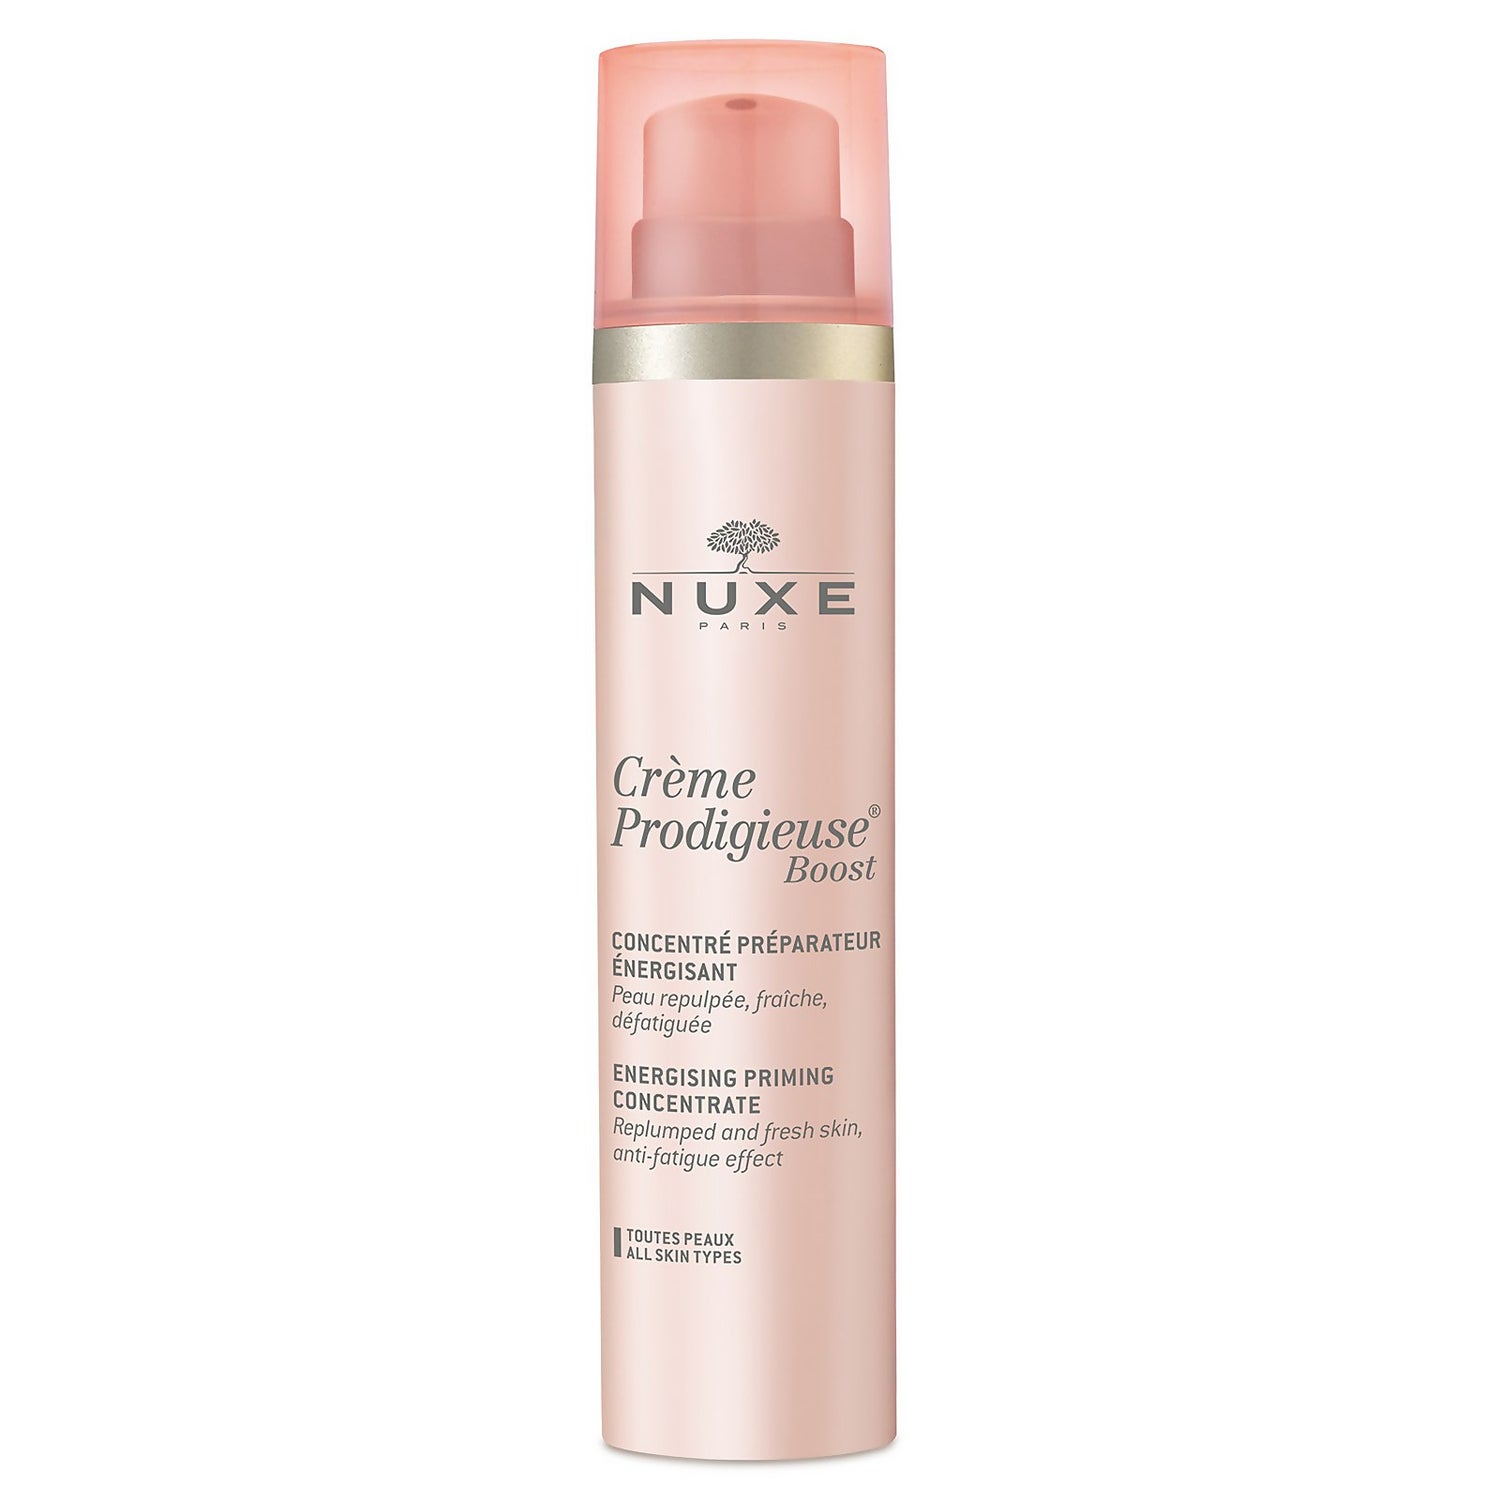 NUXE Creme Prodigieuse Boost-Energising Priming Concentrate